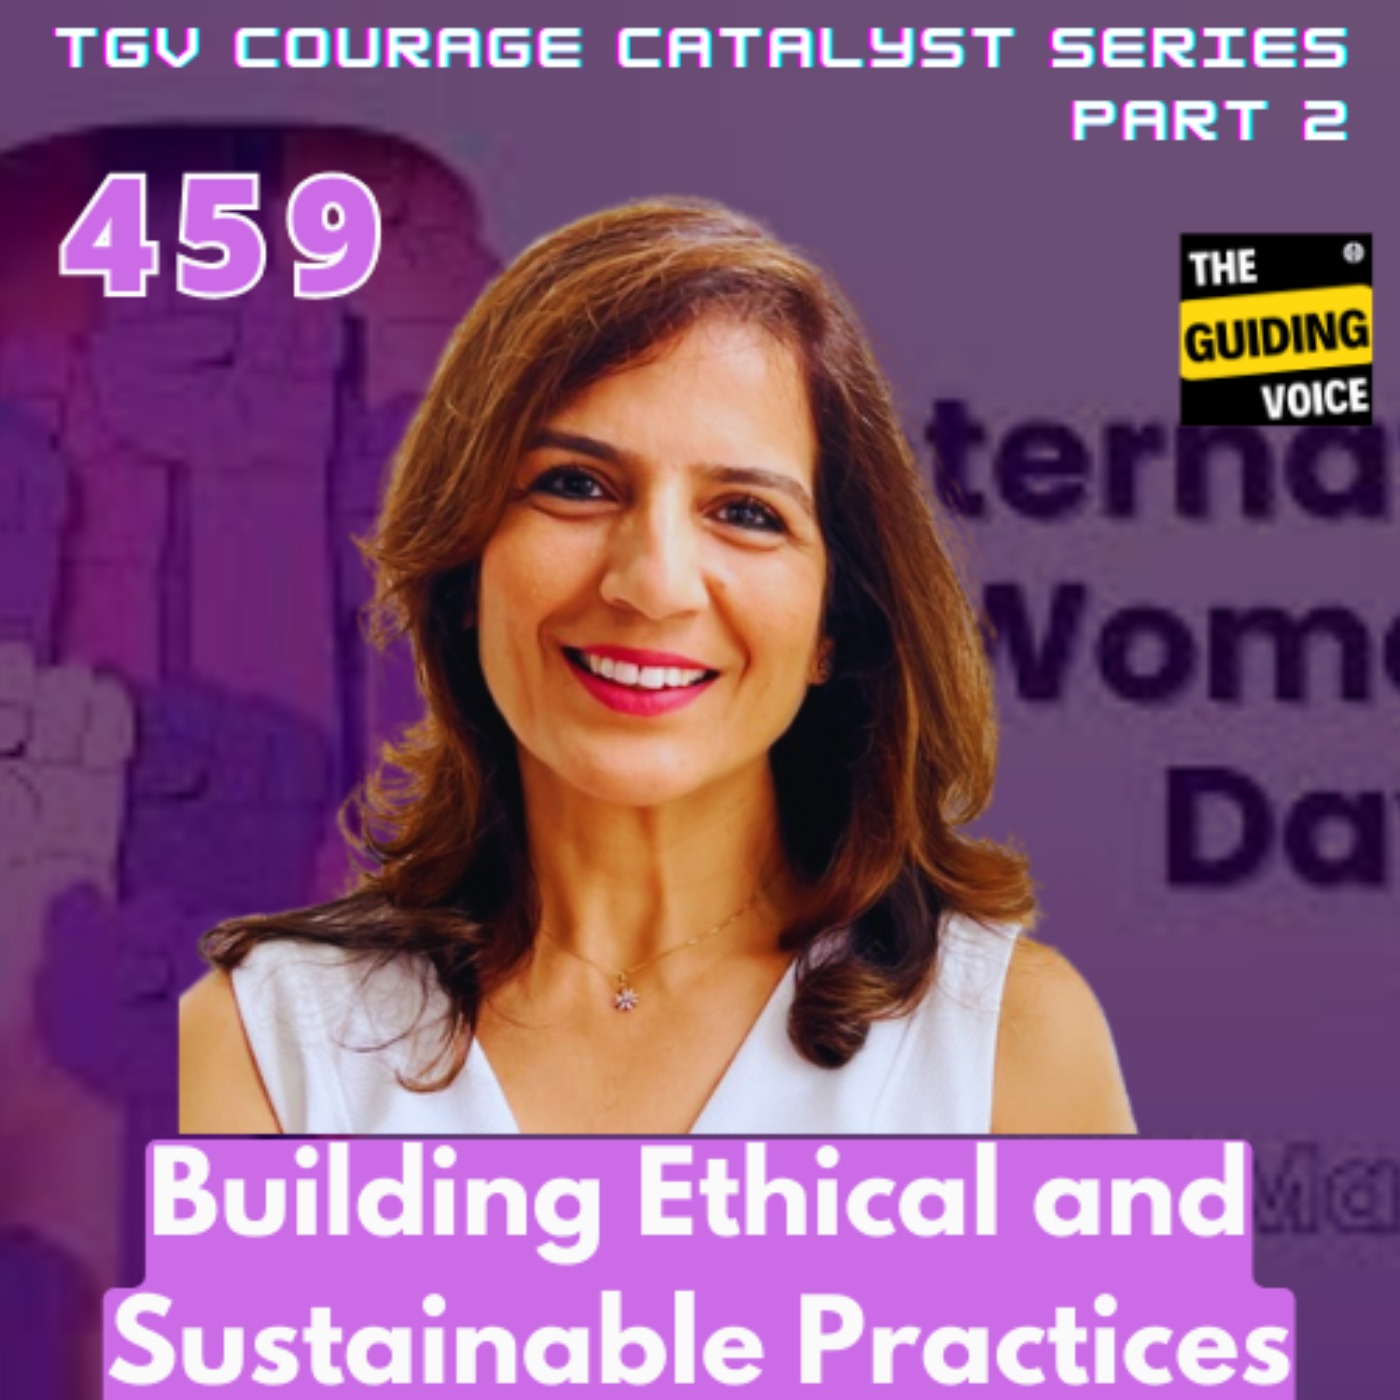 TGV Courage Catalyst Series - Part 2 - Building Ethical and Sustainable Practices | Farah Ismail | #TGV459